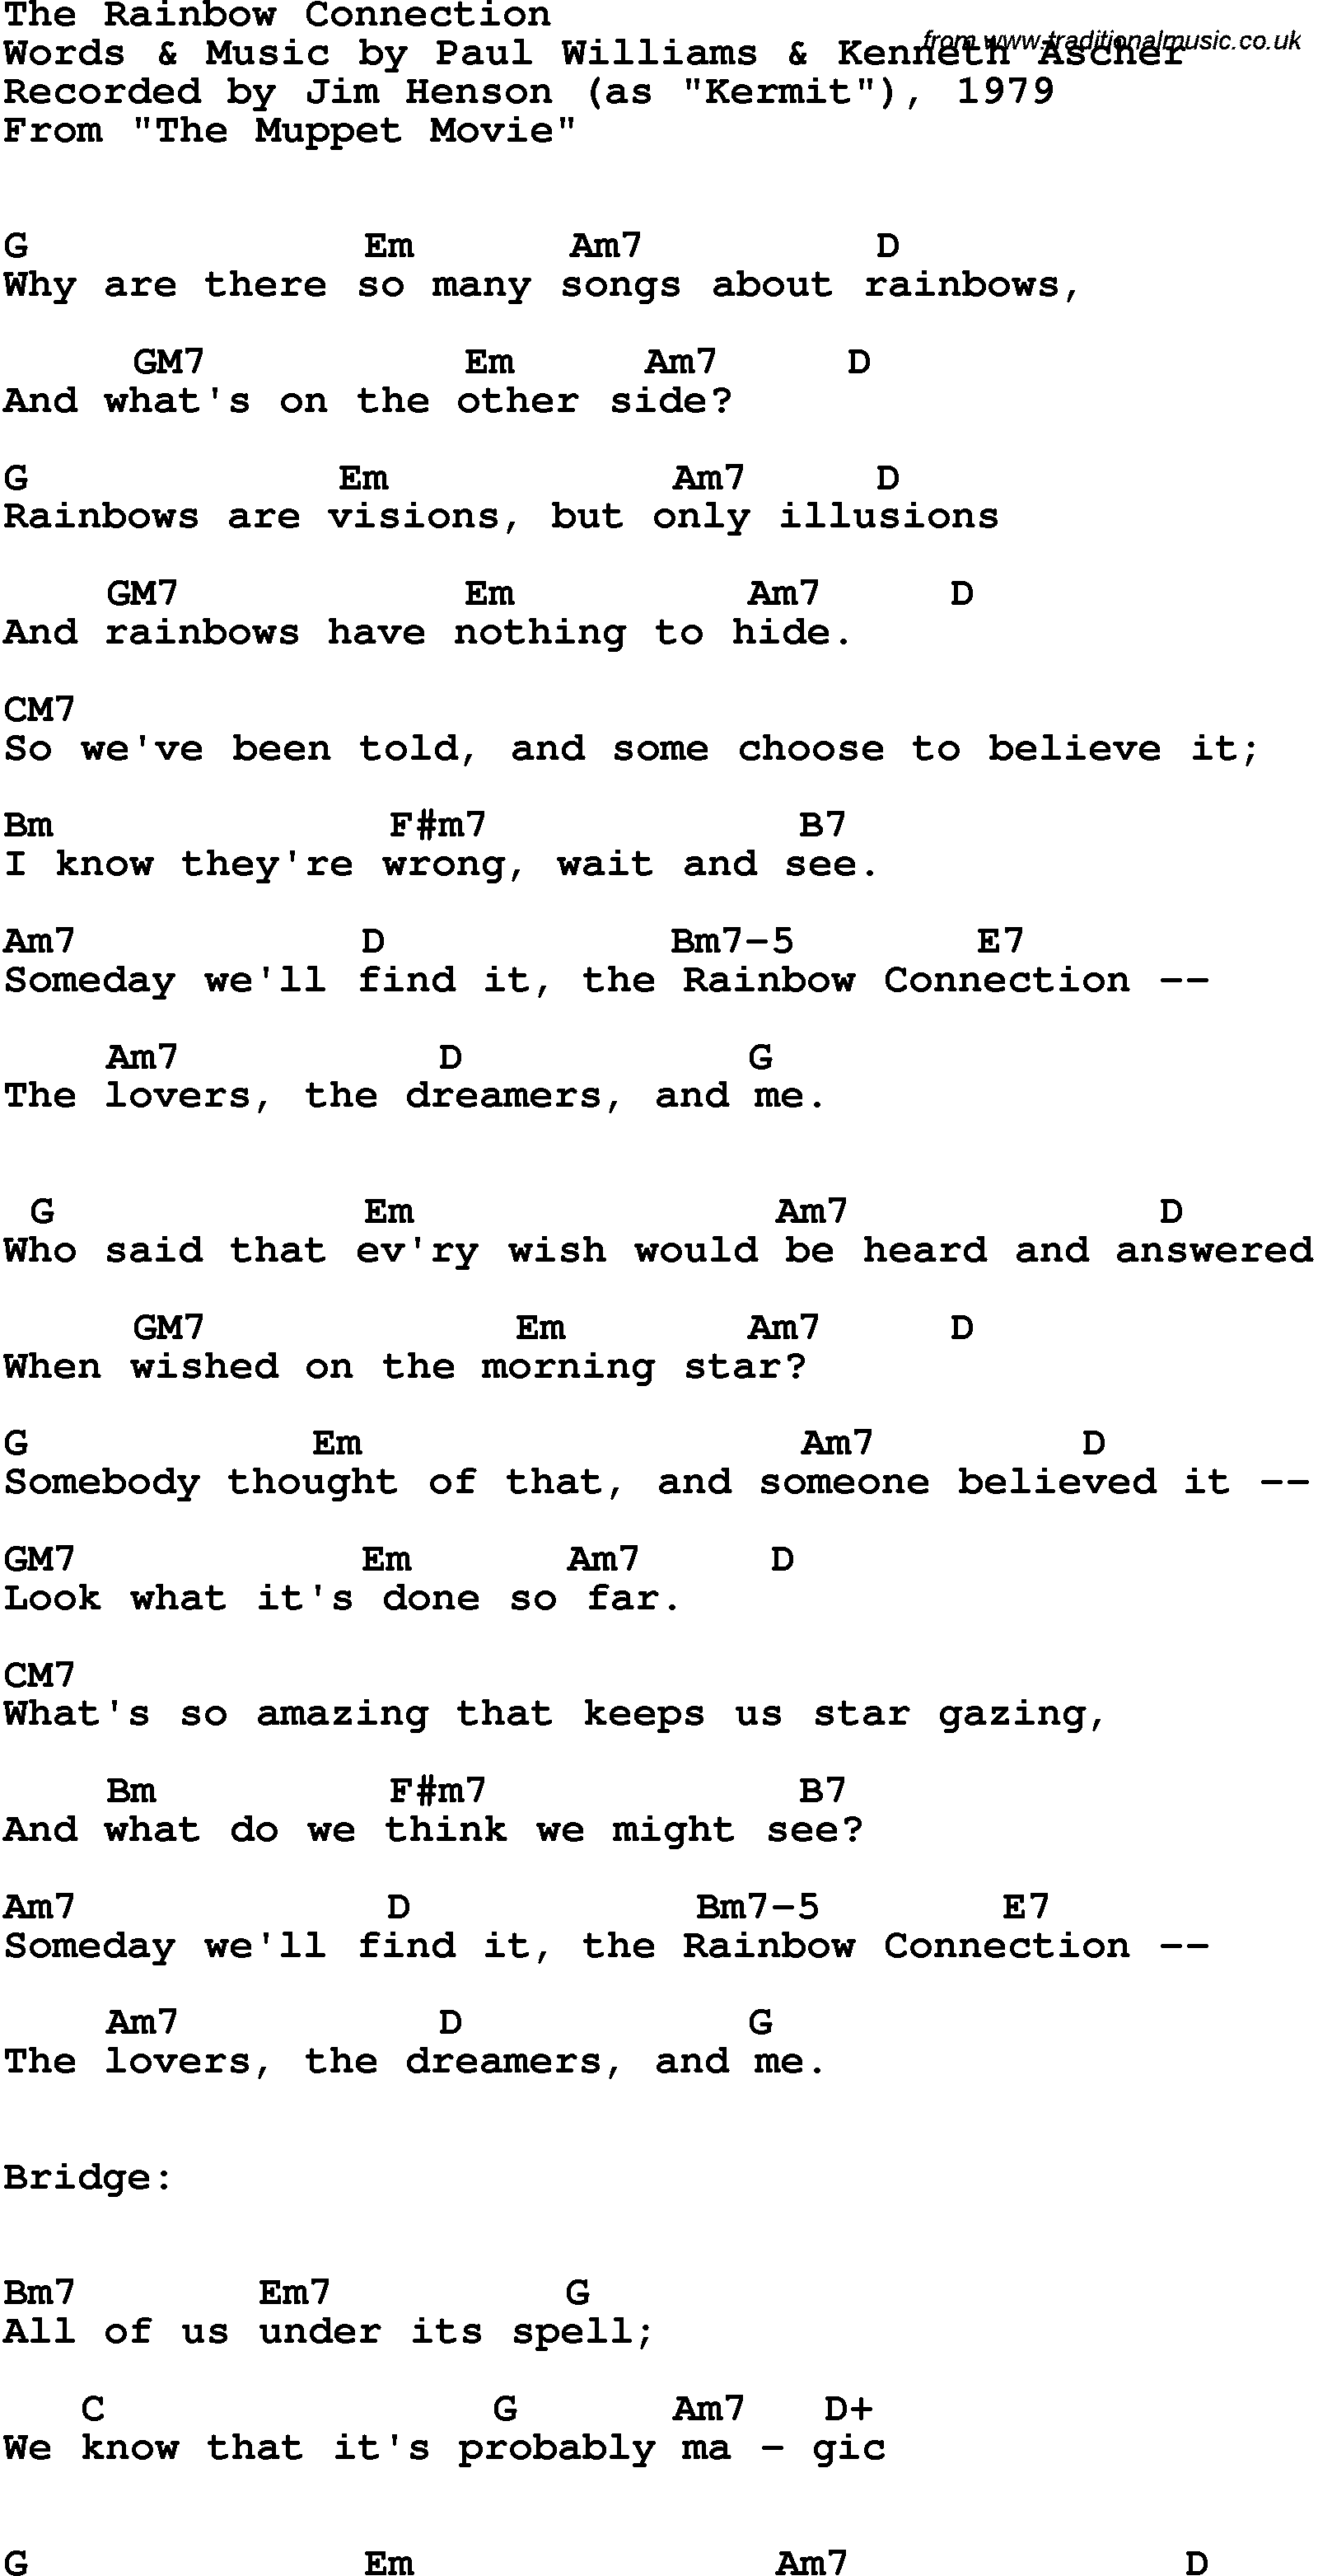 Song Lyrics with guitar chords for Rainbow Connection, The - Jim Henson, 1979